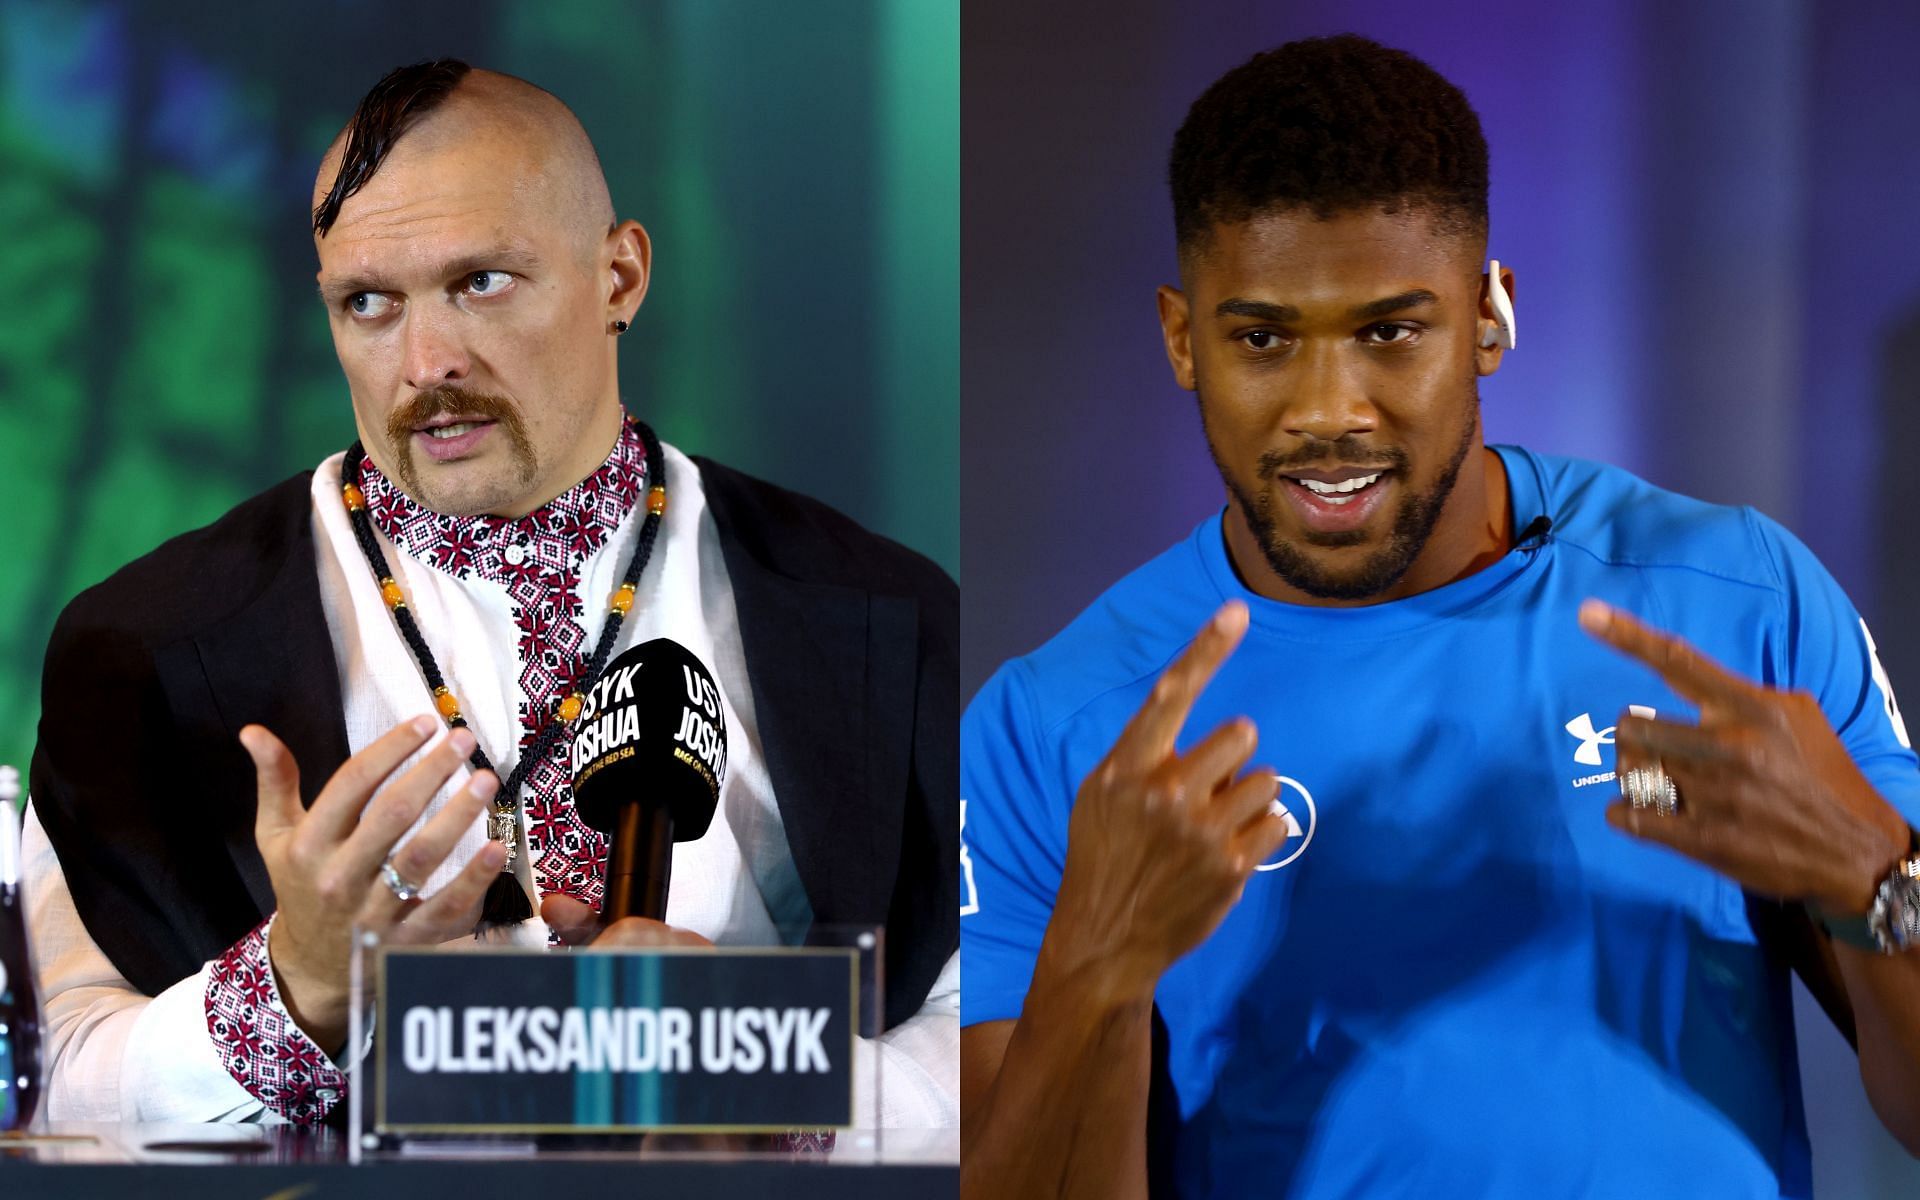 Oleksandr Usyk (left) and Anthony Joshua (right) (Image credits Getty Images)